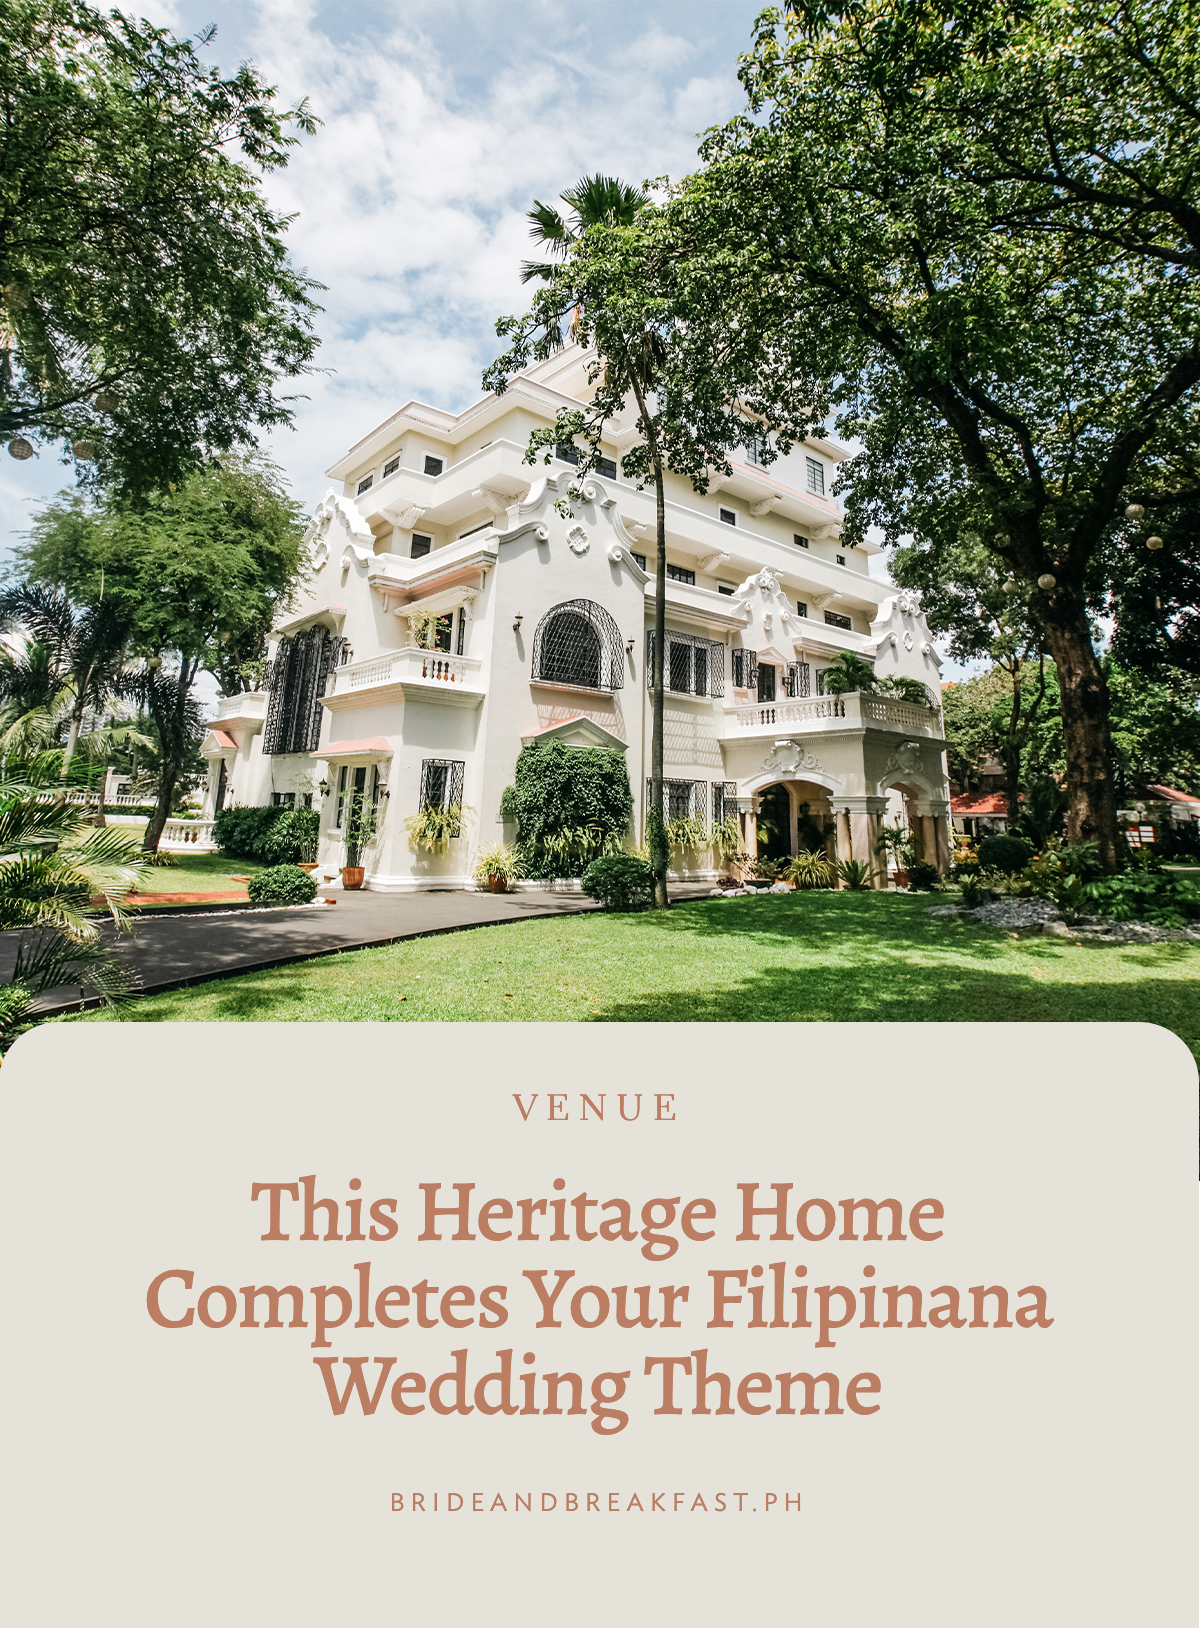 This Heritage Home Completes Your Filipinana Theme